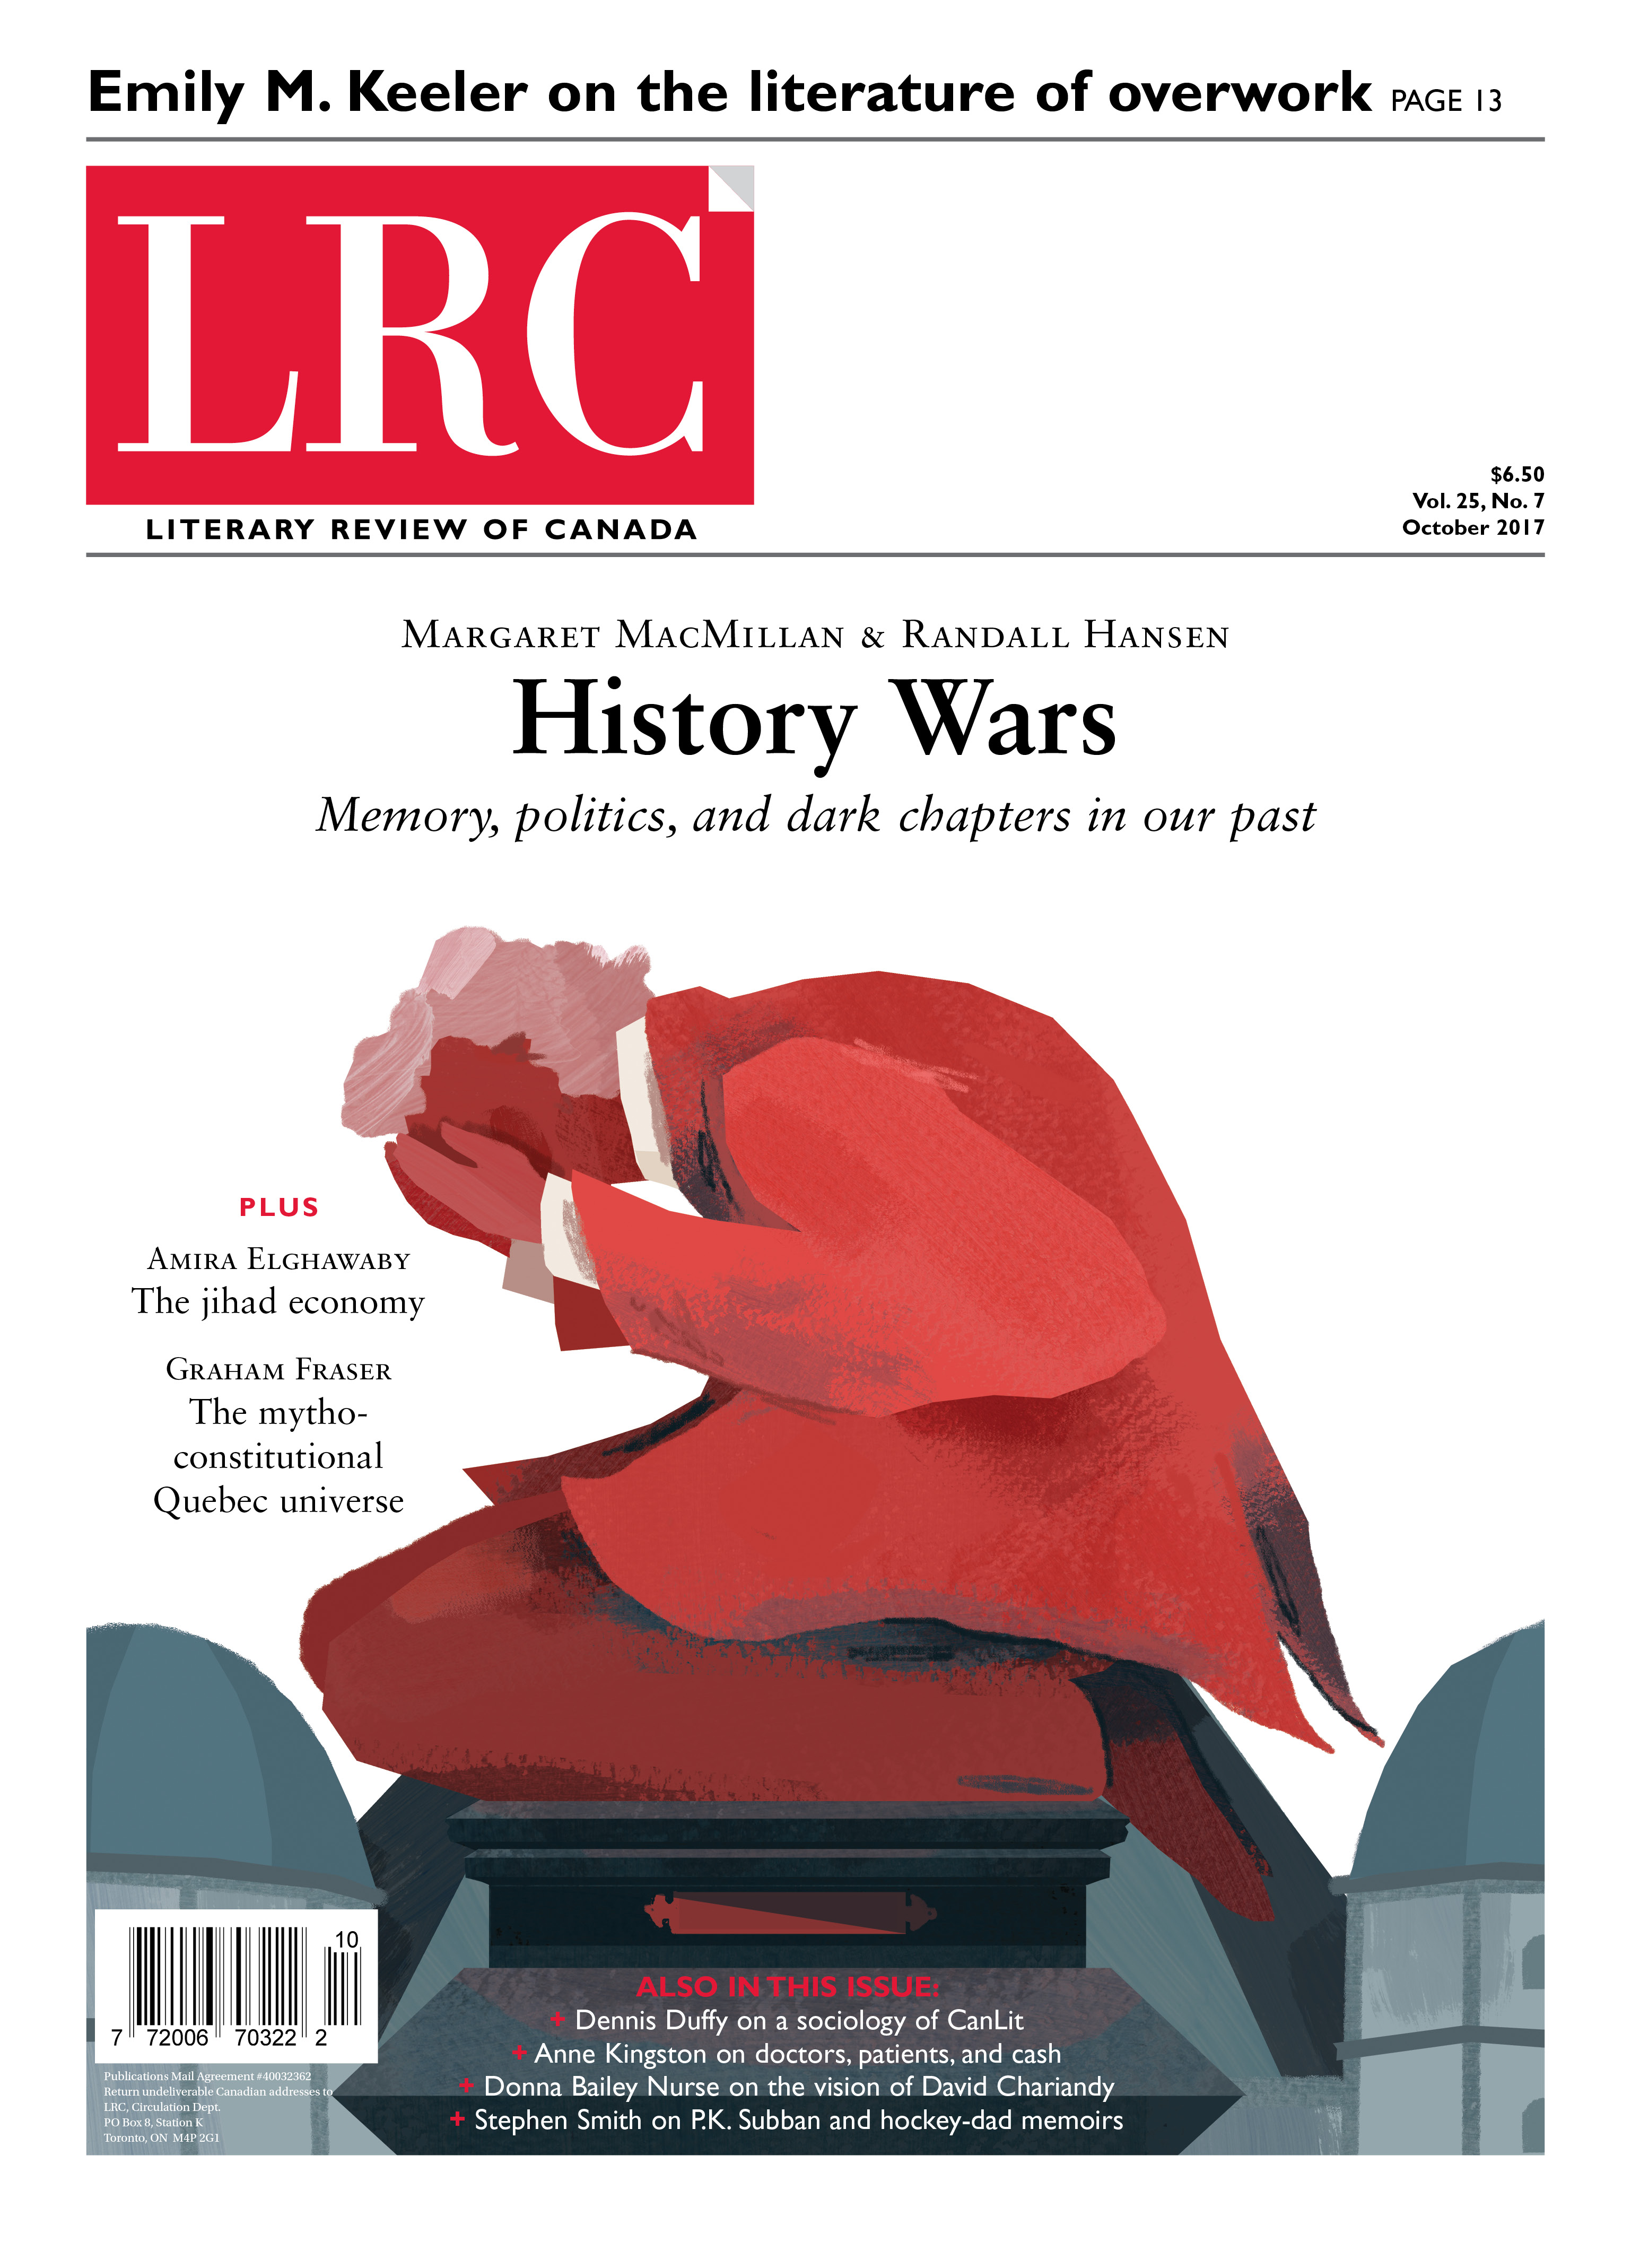 Cover image of the September 2017 issue of the Literary Review of Canada